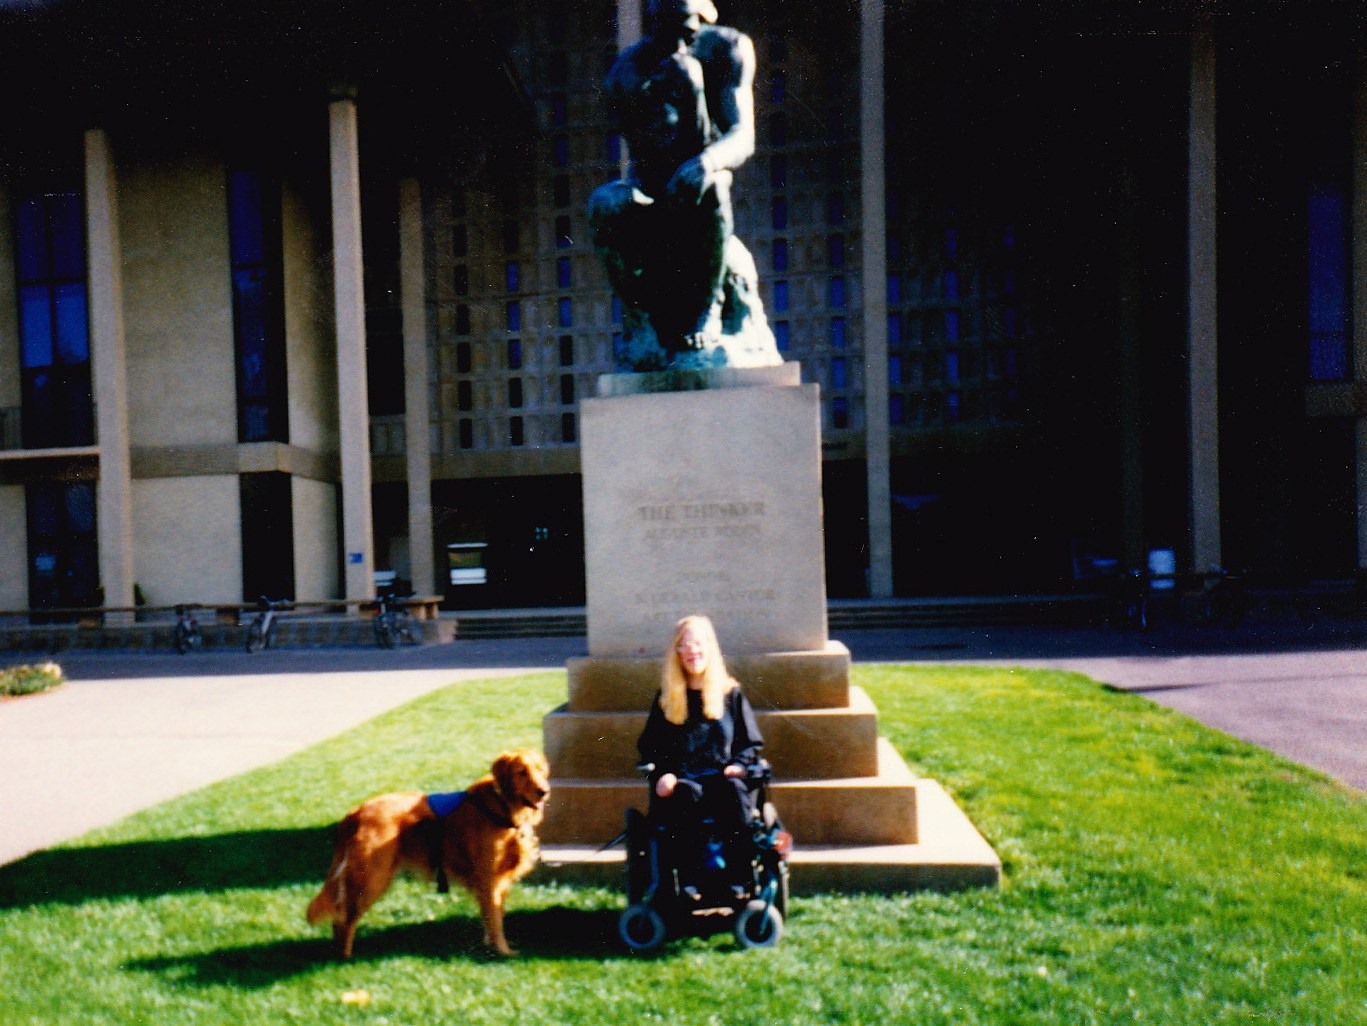 Karin poses in front of "The Thinker" while a student at Stanford University.